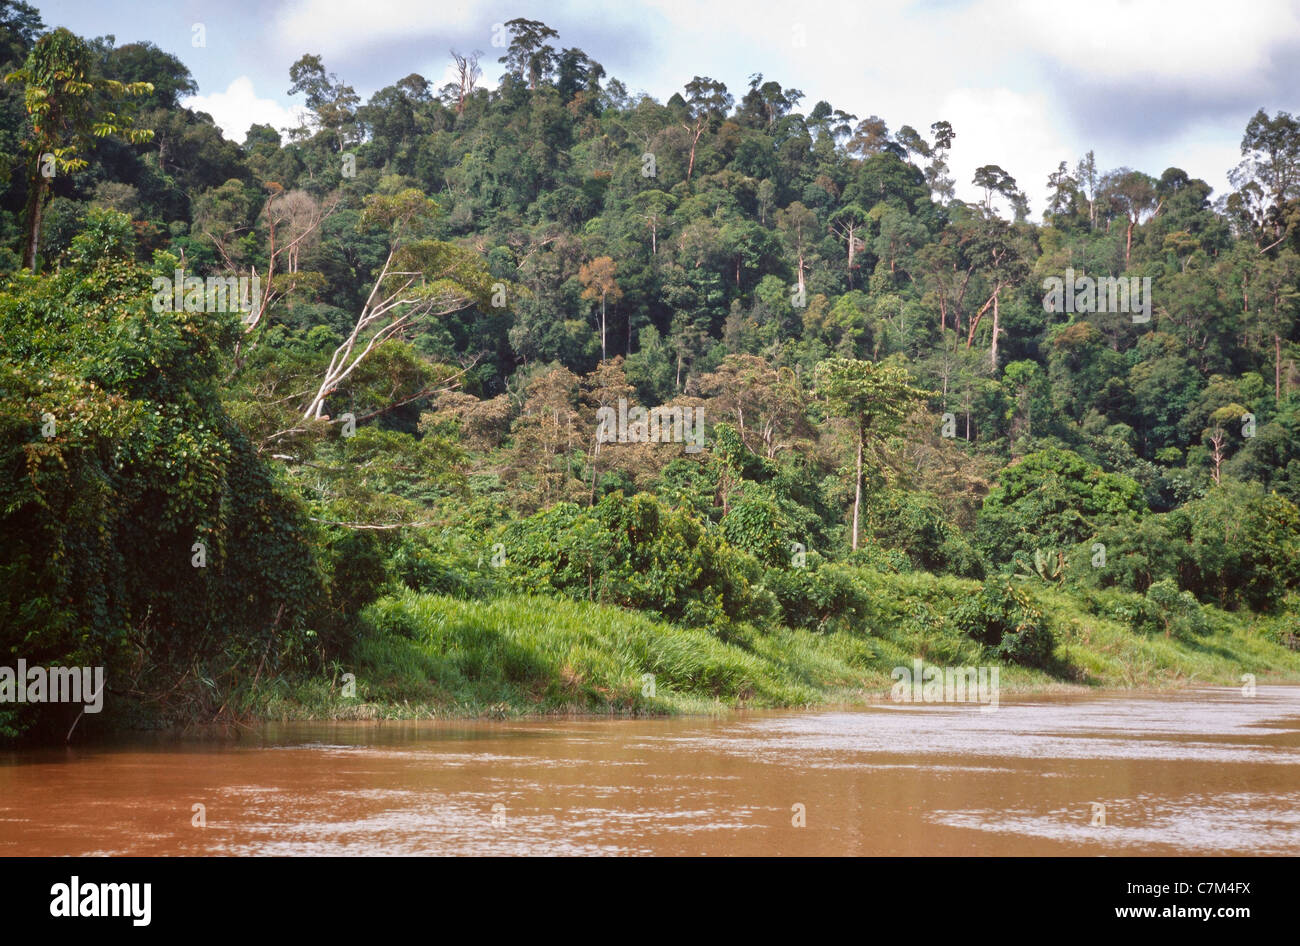 River bank forest cover, muddy river water, Mulu National Park, Sarawak, Borneo, East Malaysia Stock Photo